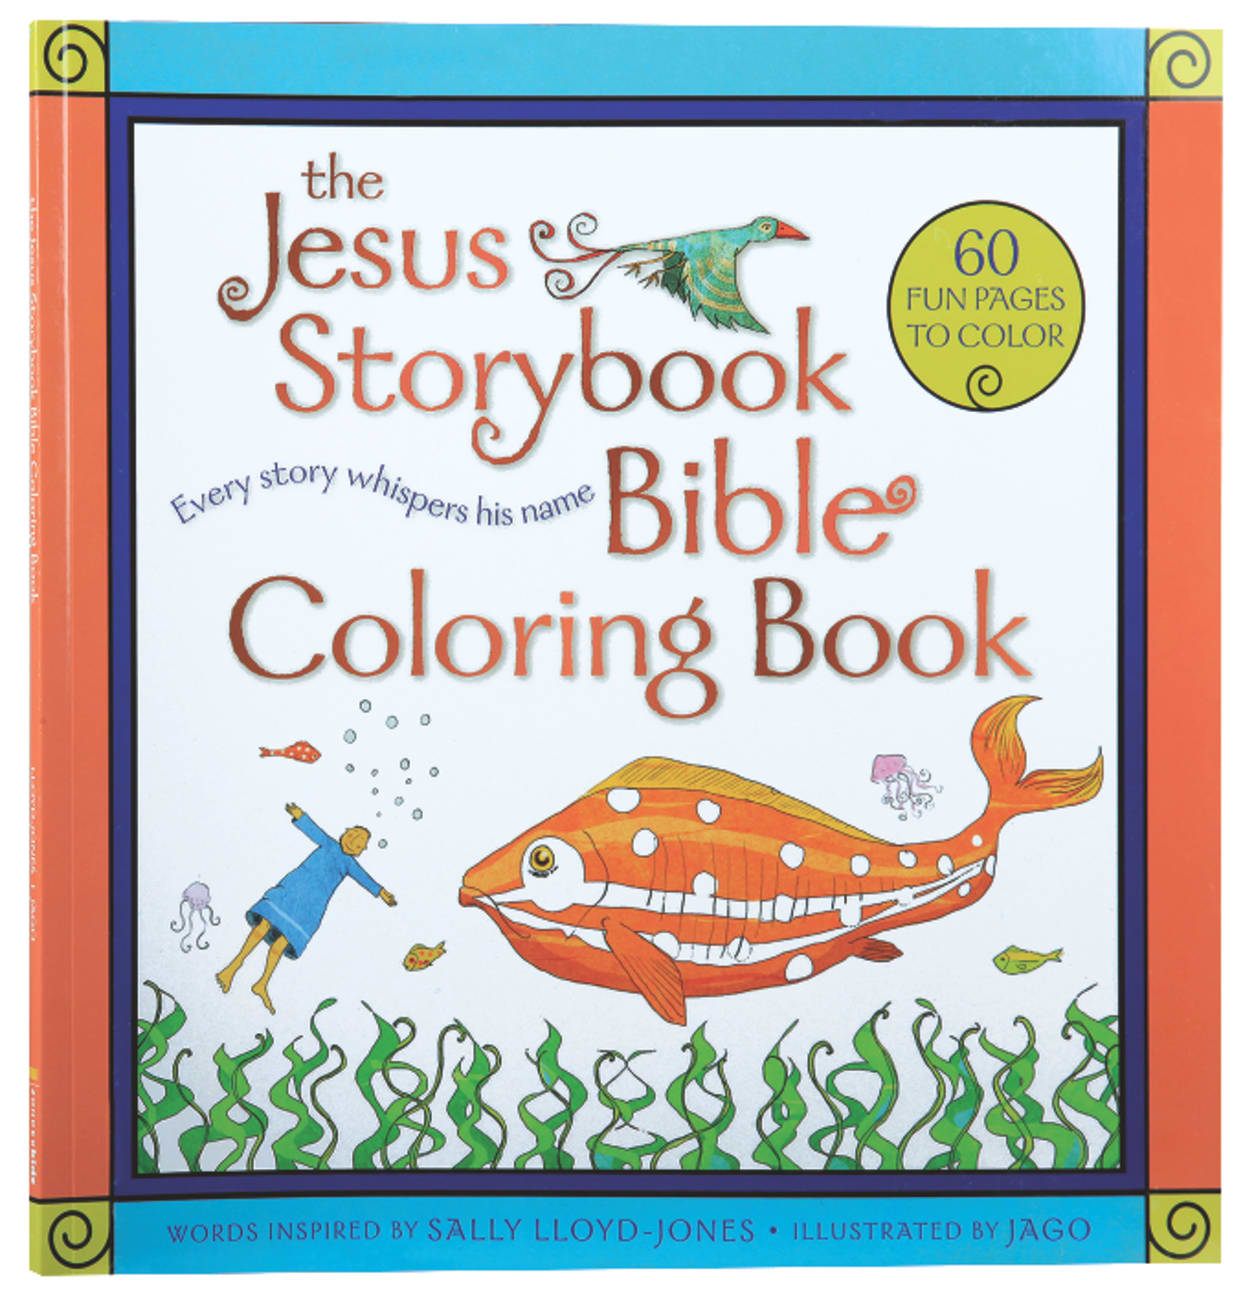 The Jesus Storybook Bible Coloring Book: Every Story Whispers His Name Paperback